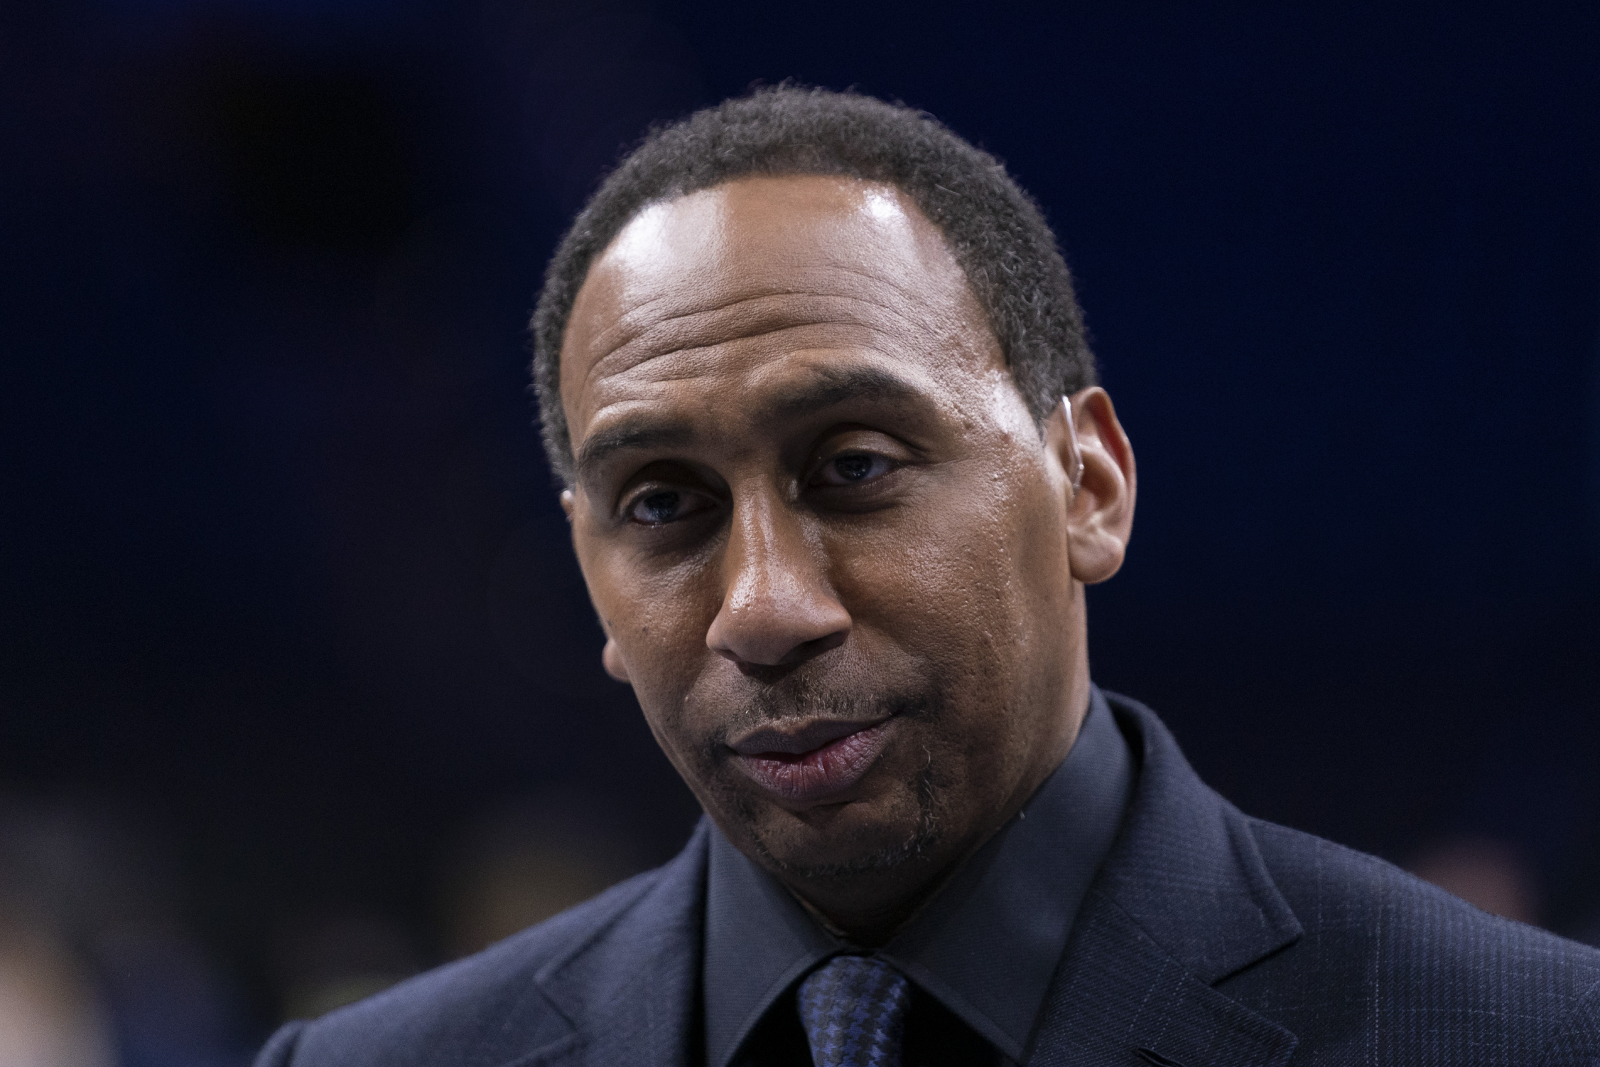 Stephen A. Smith has a big rivalry with the Dallas Cowboys. His recent surprise appearance at 'The Game Awards' added another chapter to it.